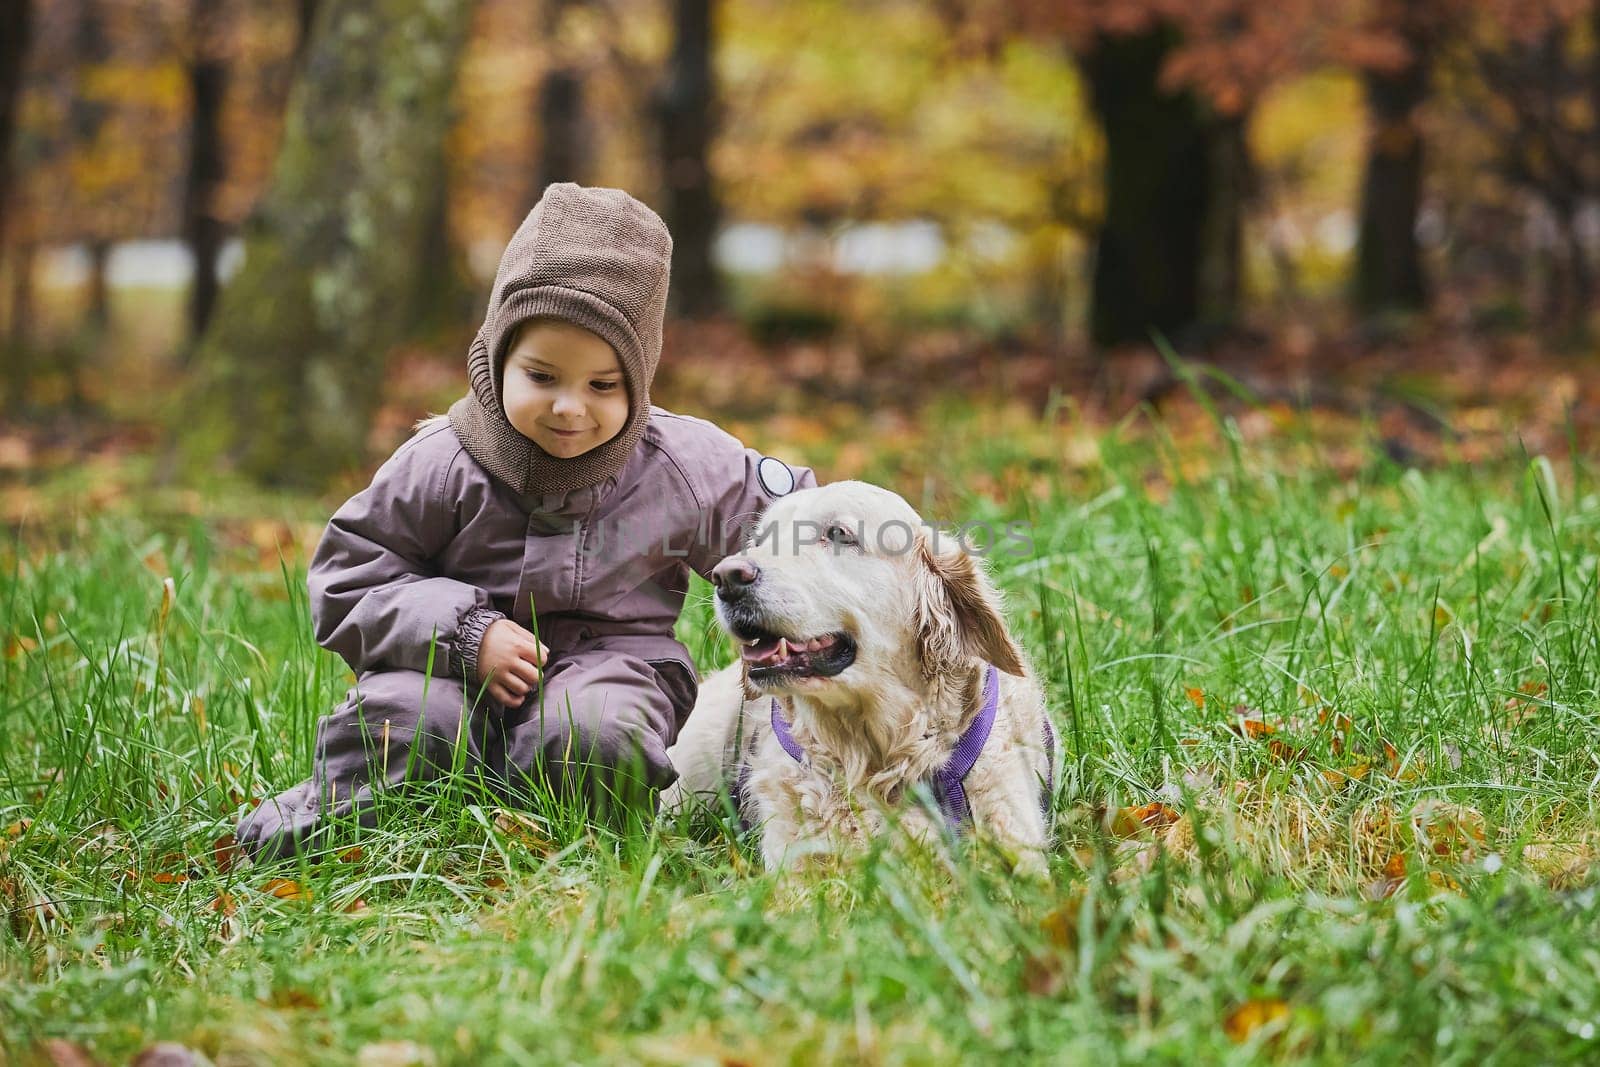 Charming child and dog walking in the forest in Denmark by Viktor_Osypenko